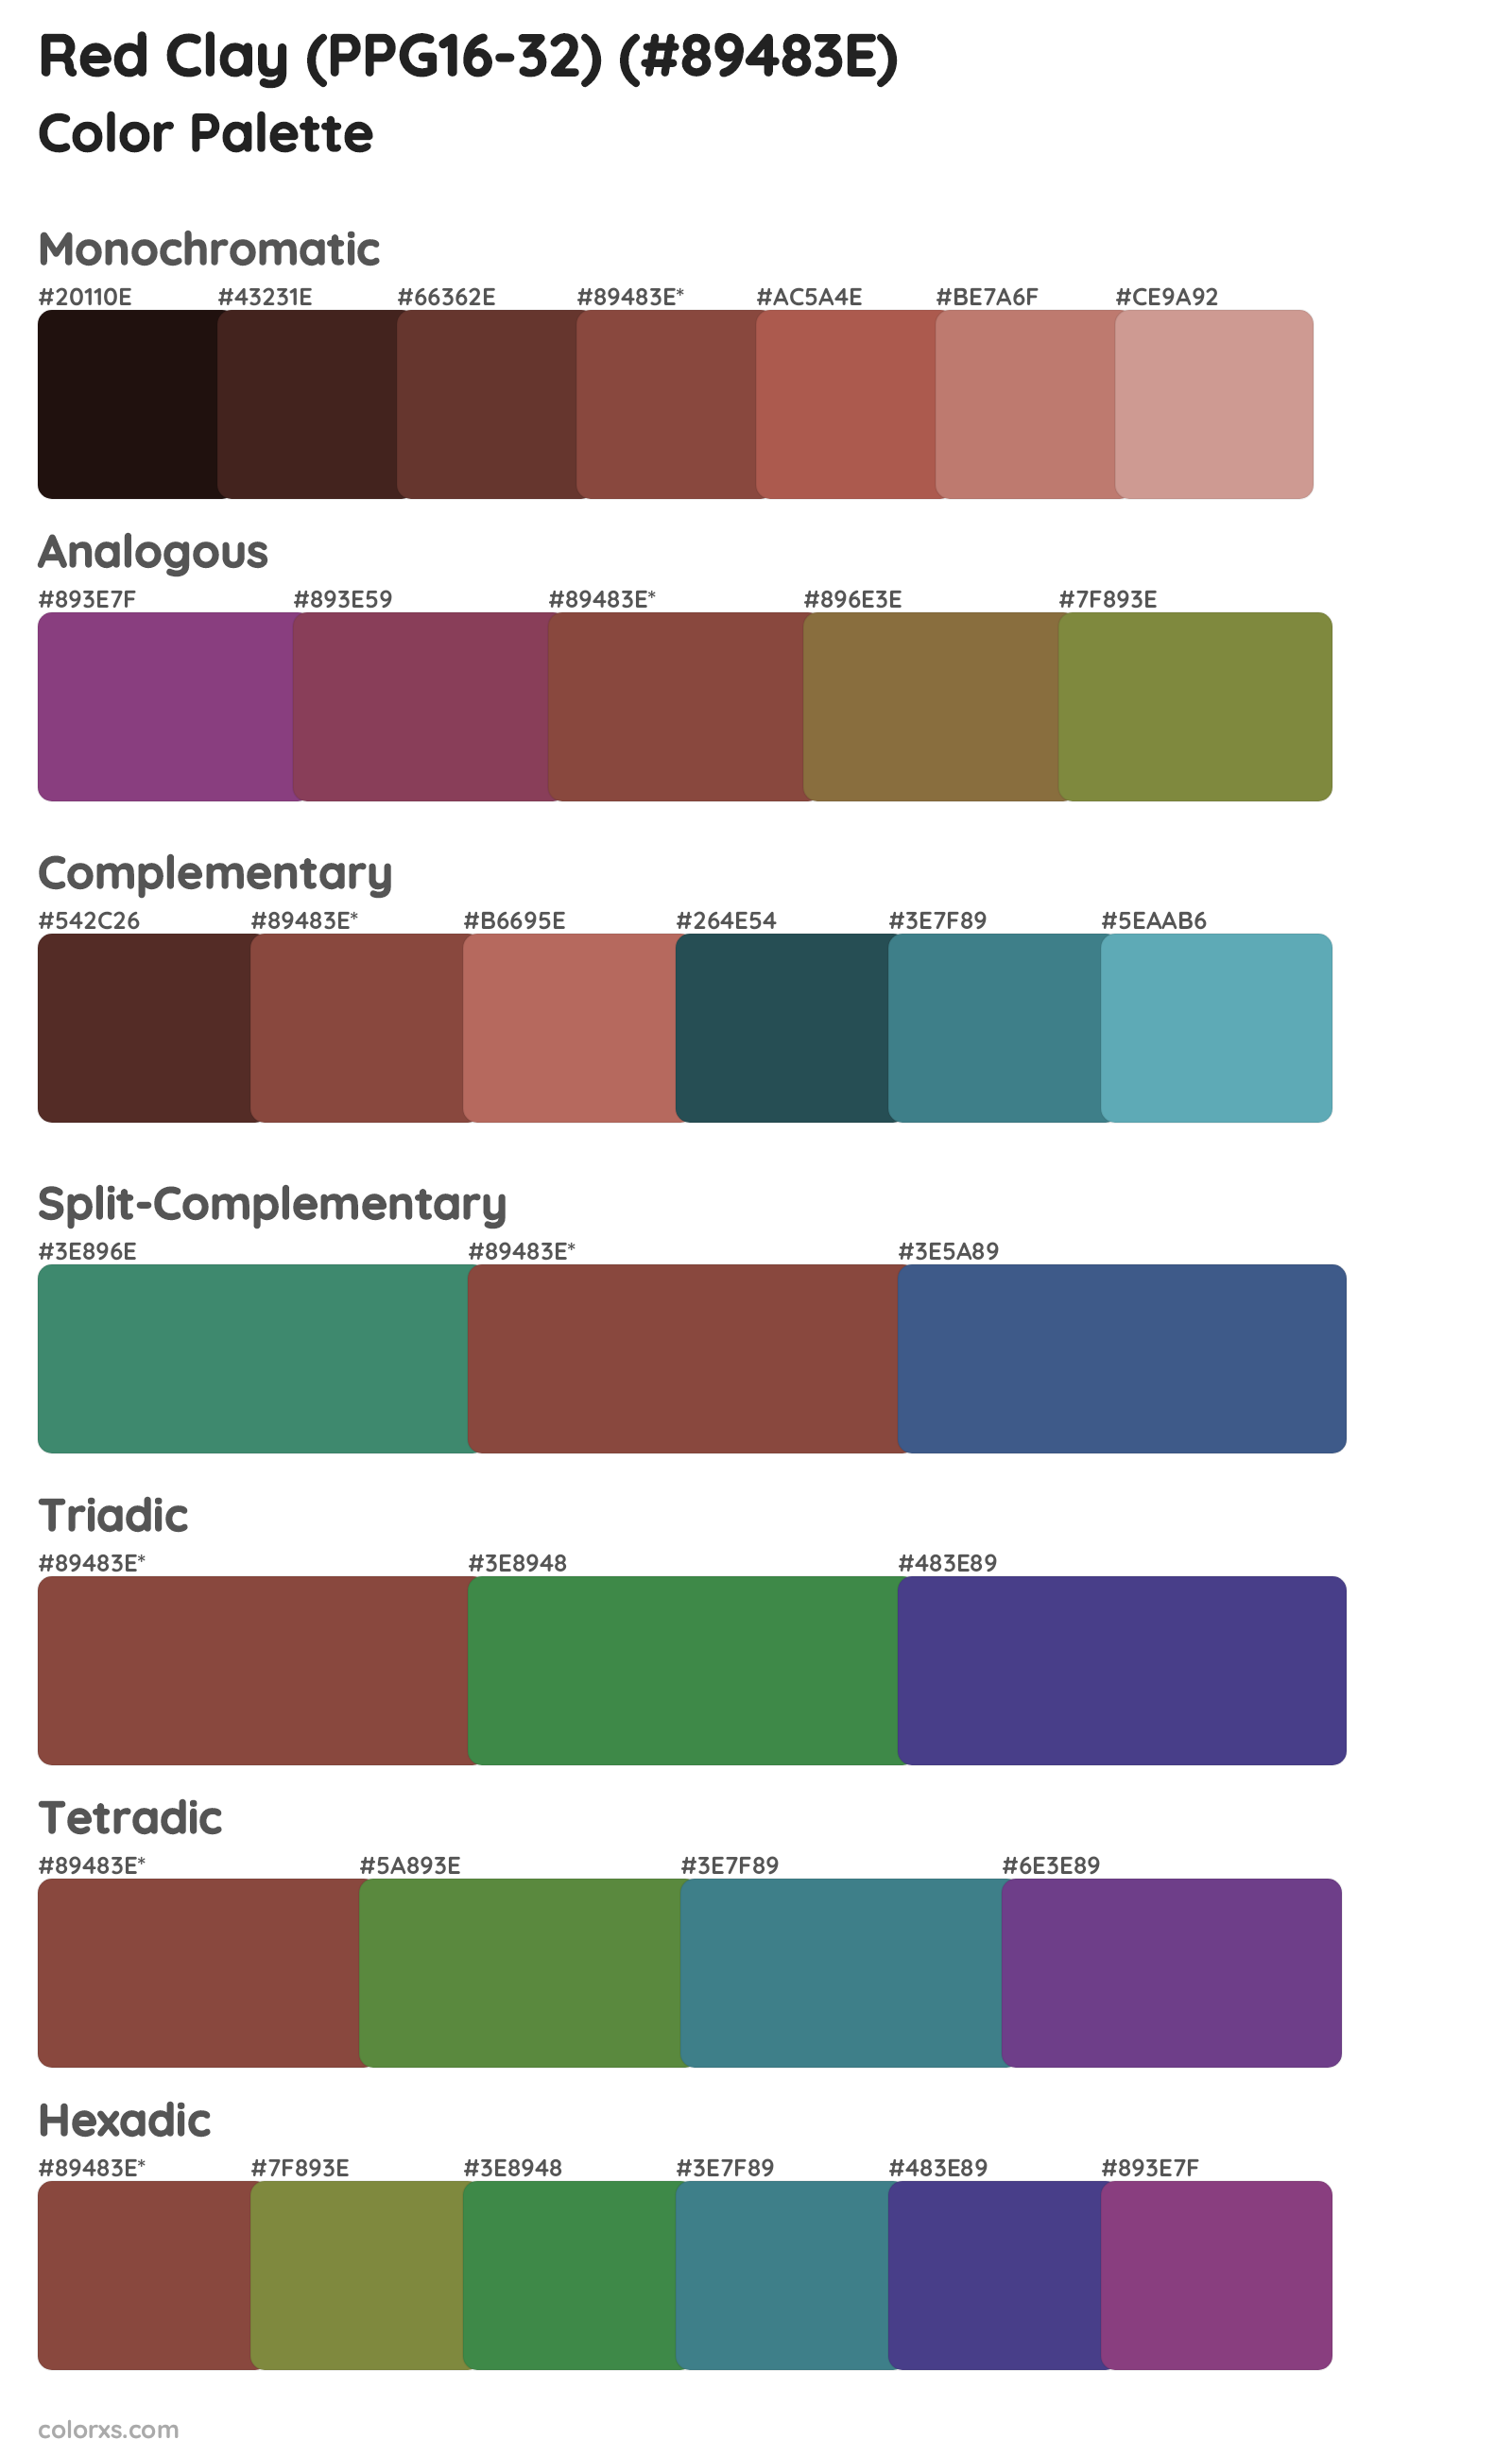 Red Clay (PPG16-32) Color Scheme Palettes